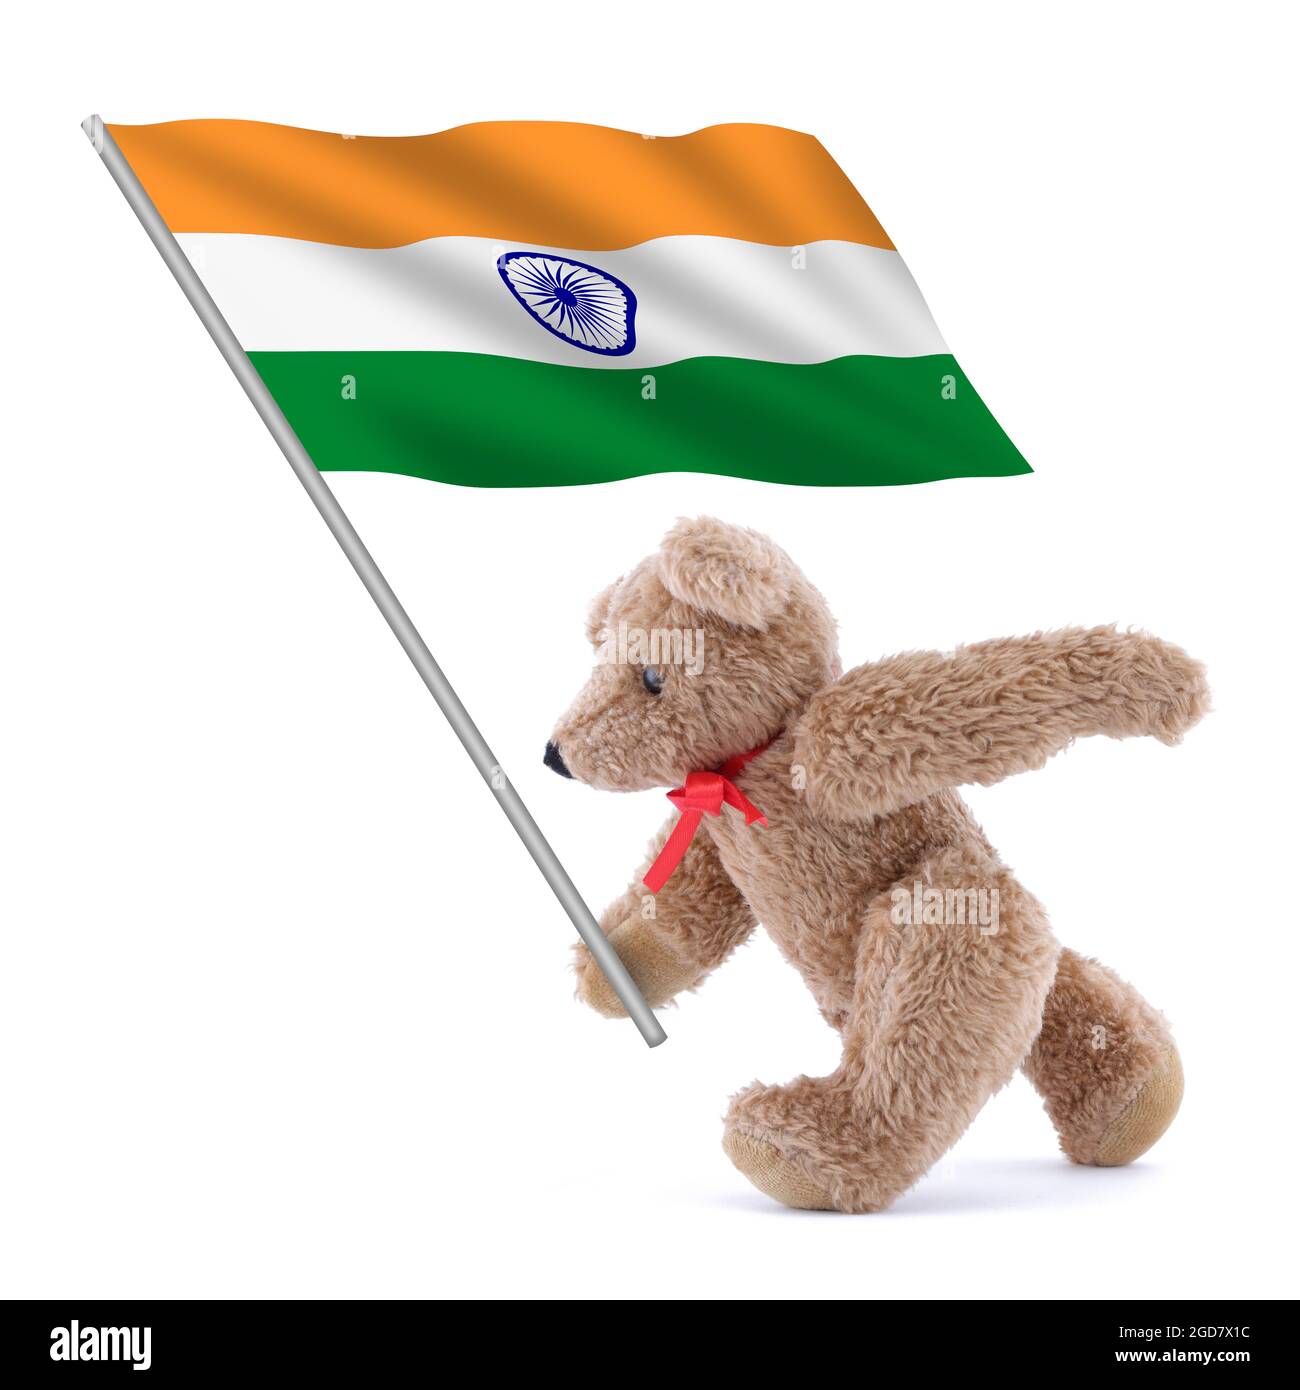 India flag being carried by a cute teddy bear Stock Photo